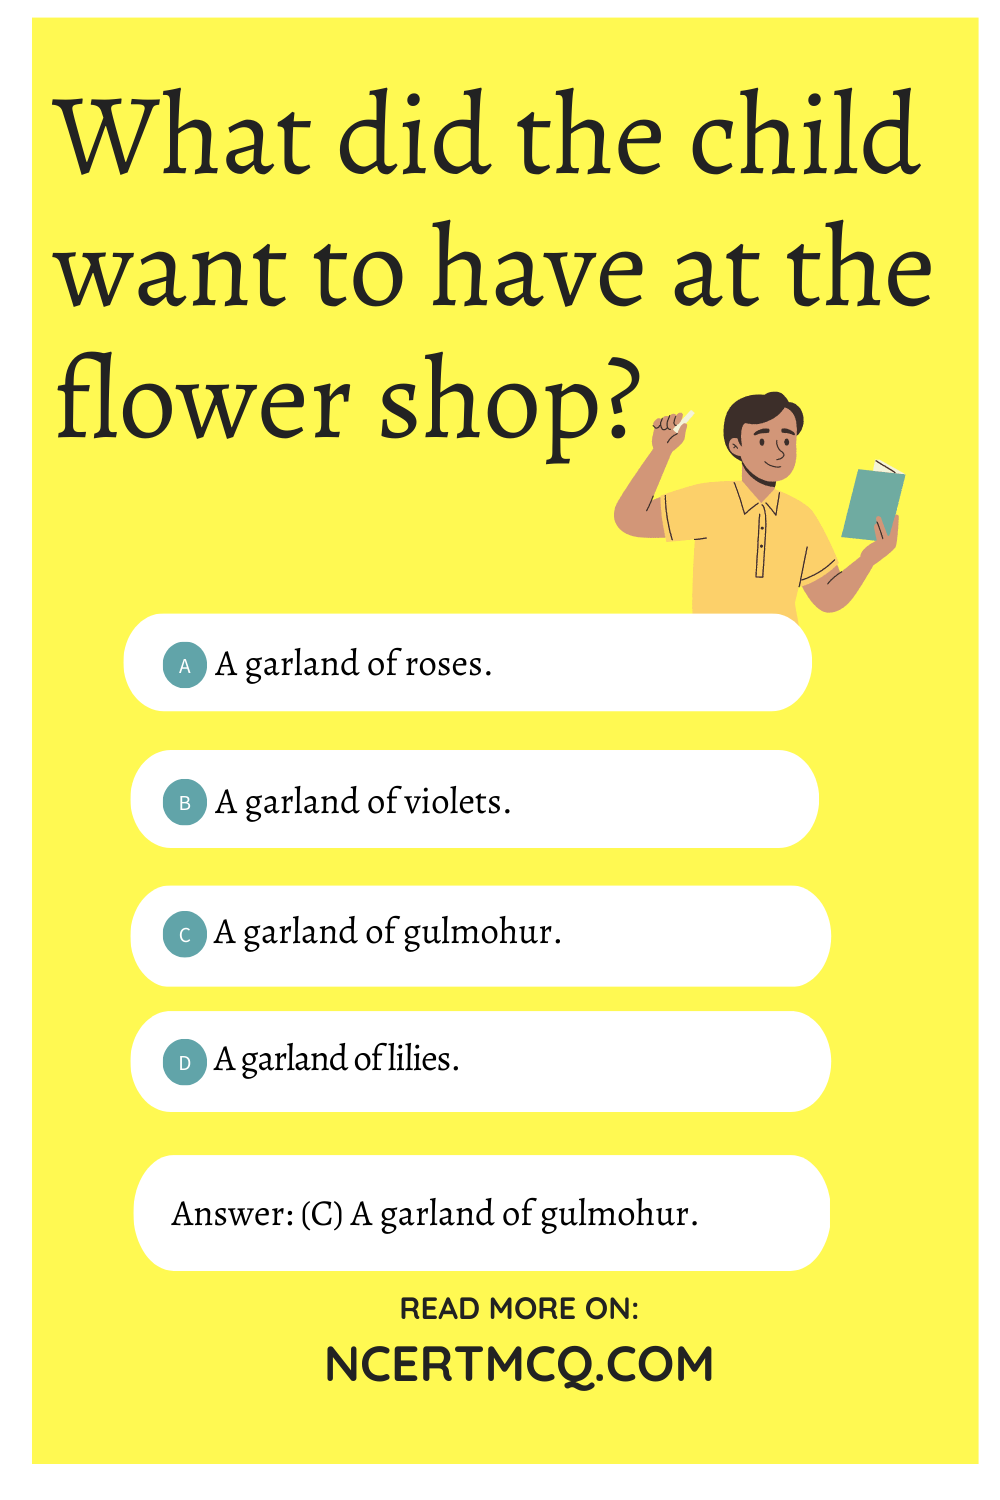 What did the child want to have at the flower shop?